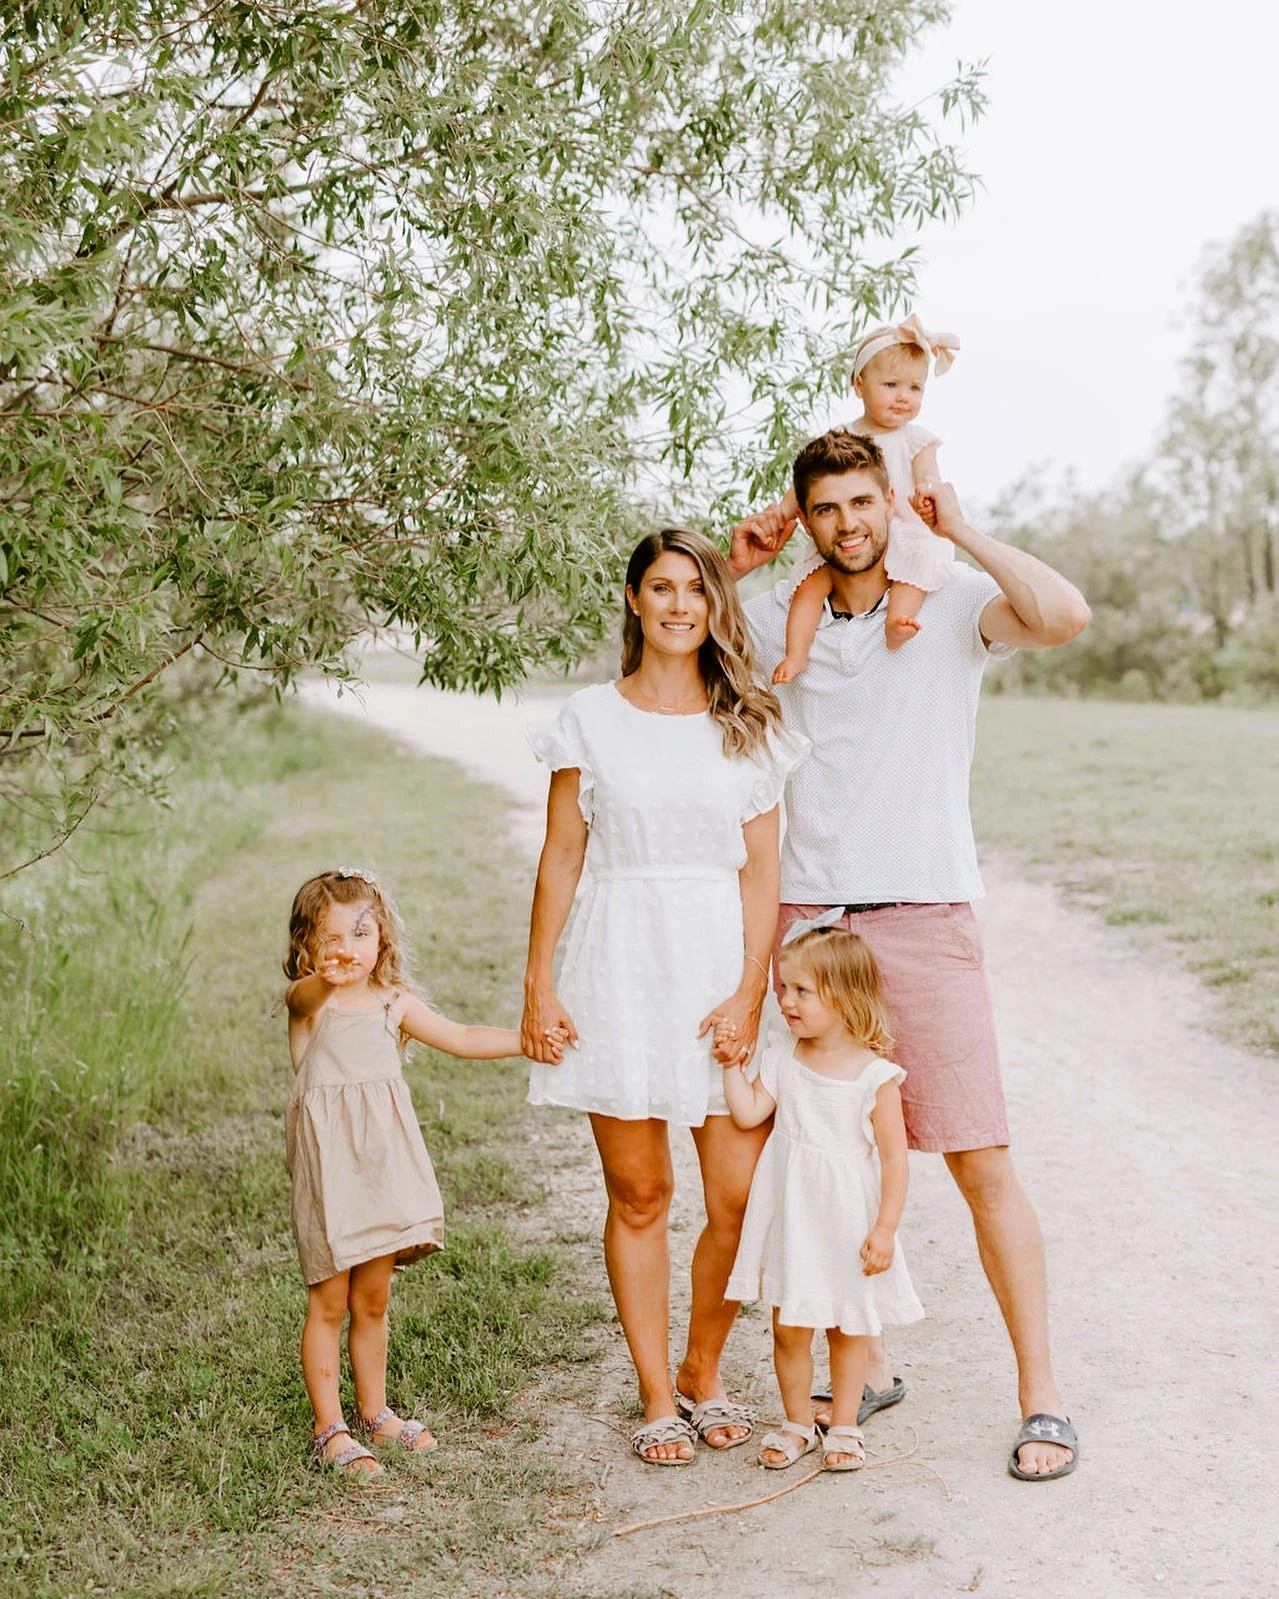 neutral colored summer family photo outfits